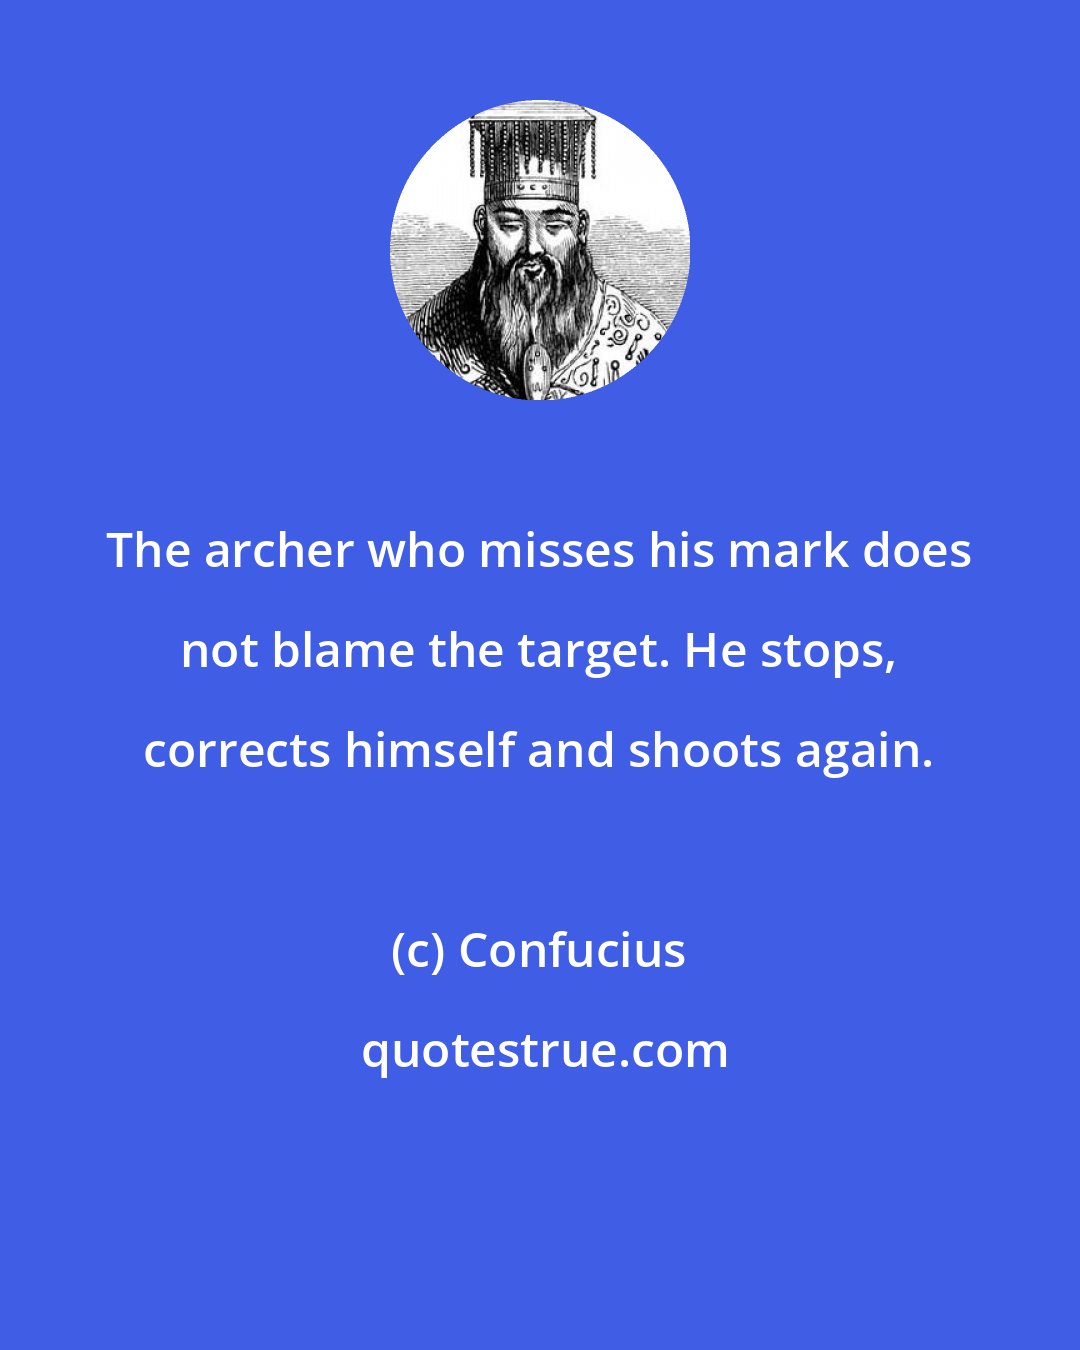 Confucius: The archer who misses his mark does not blame the target. He stops, corrects himself and shoots again.